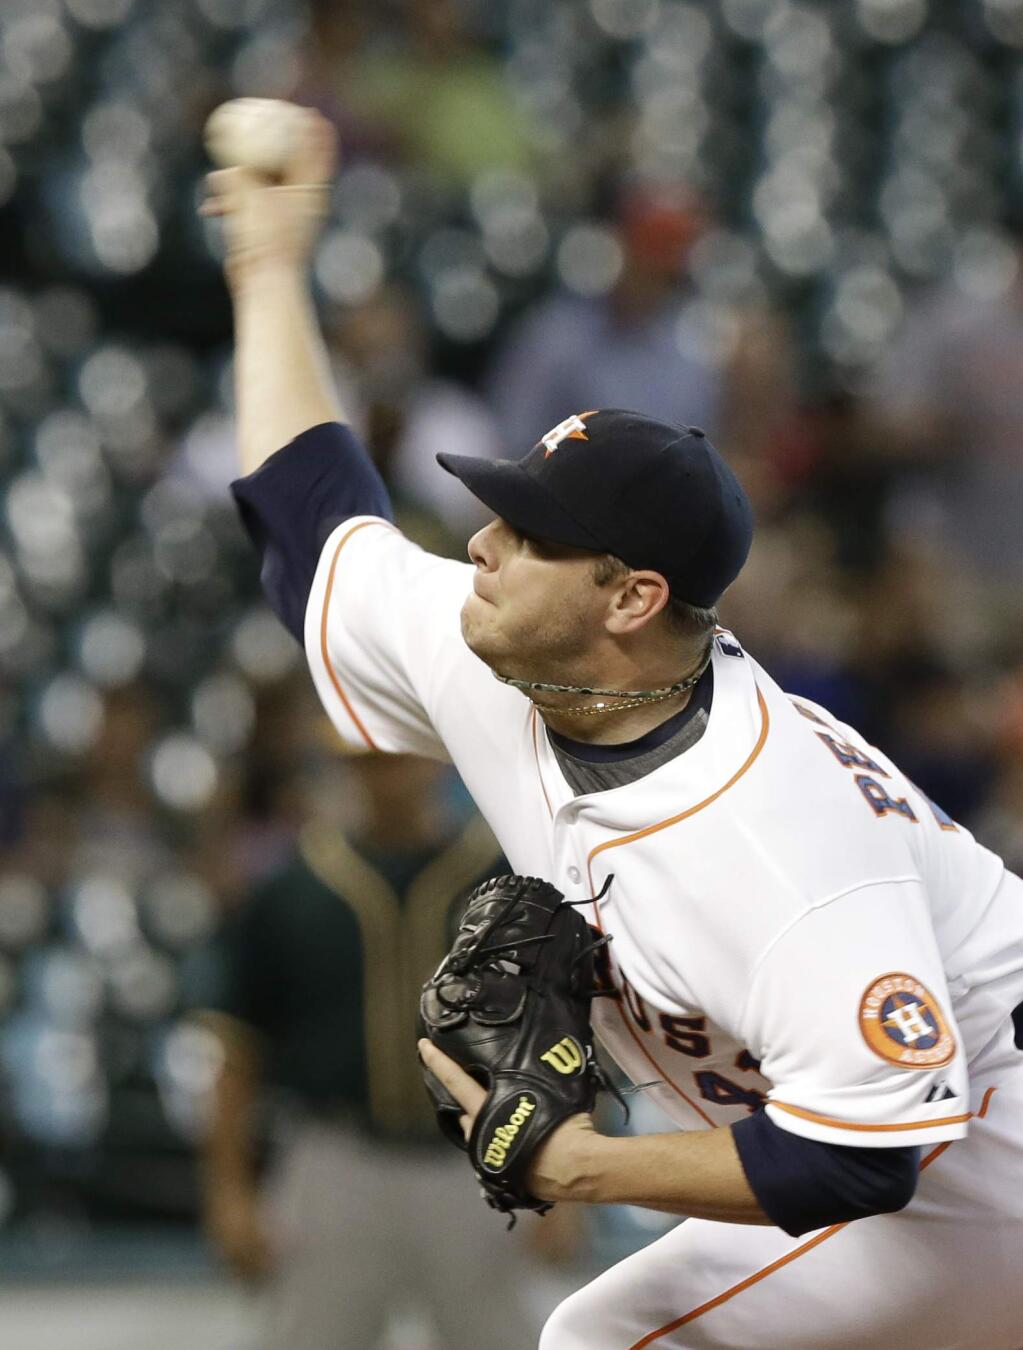 Houston Astros' Brad Peacock delivers a pitch against the Oakland Athletics in the first inning of a baseball game Wednesday, Aug. 27, 2014, in Houston. (AP Photo/Pat Sullivan)